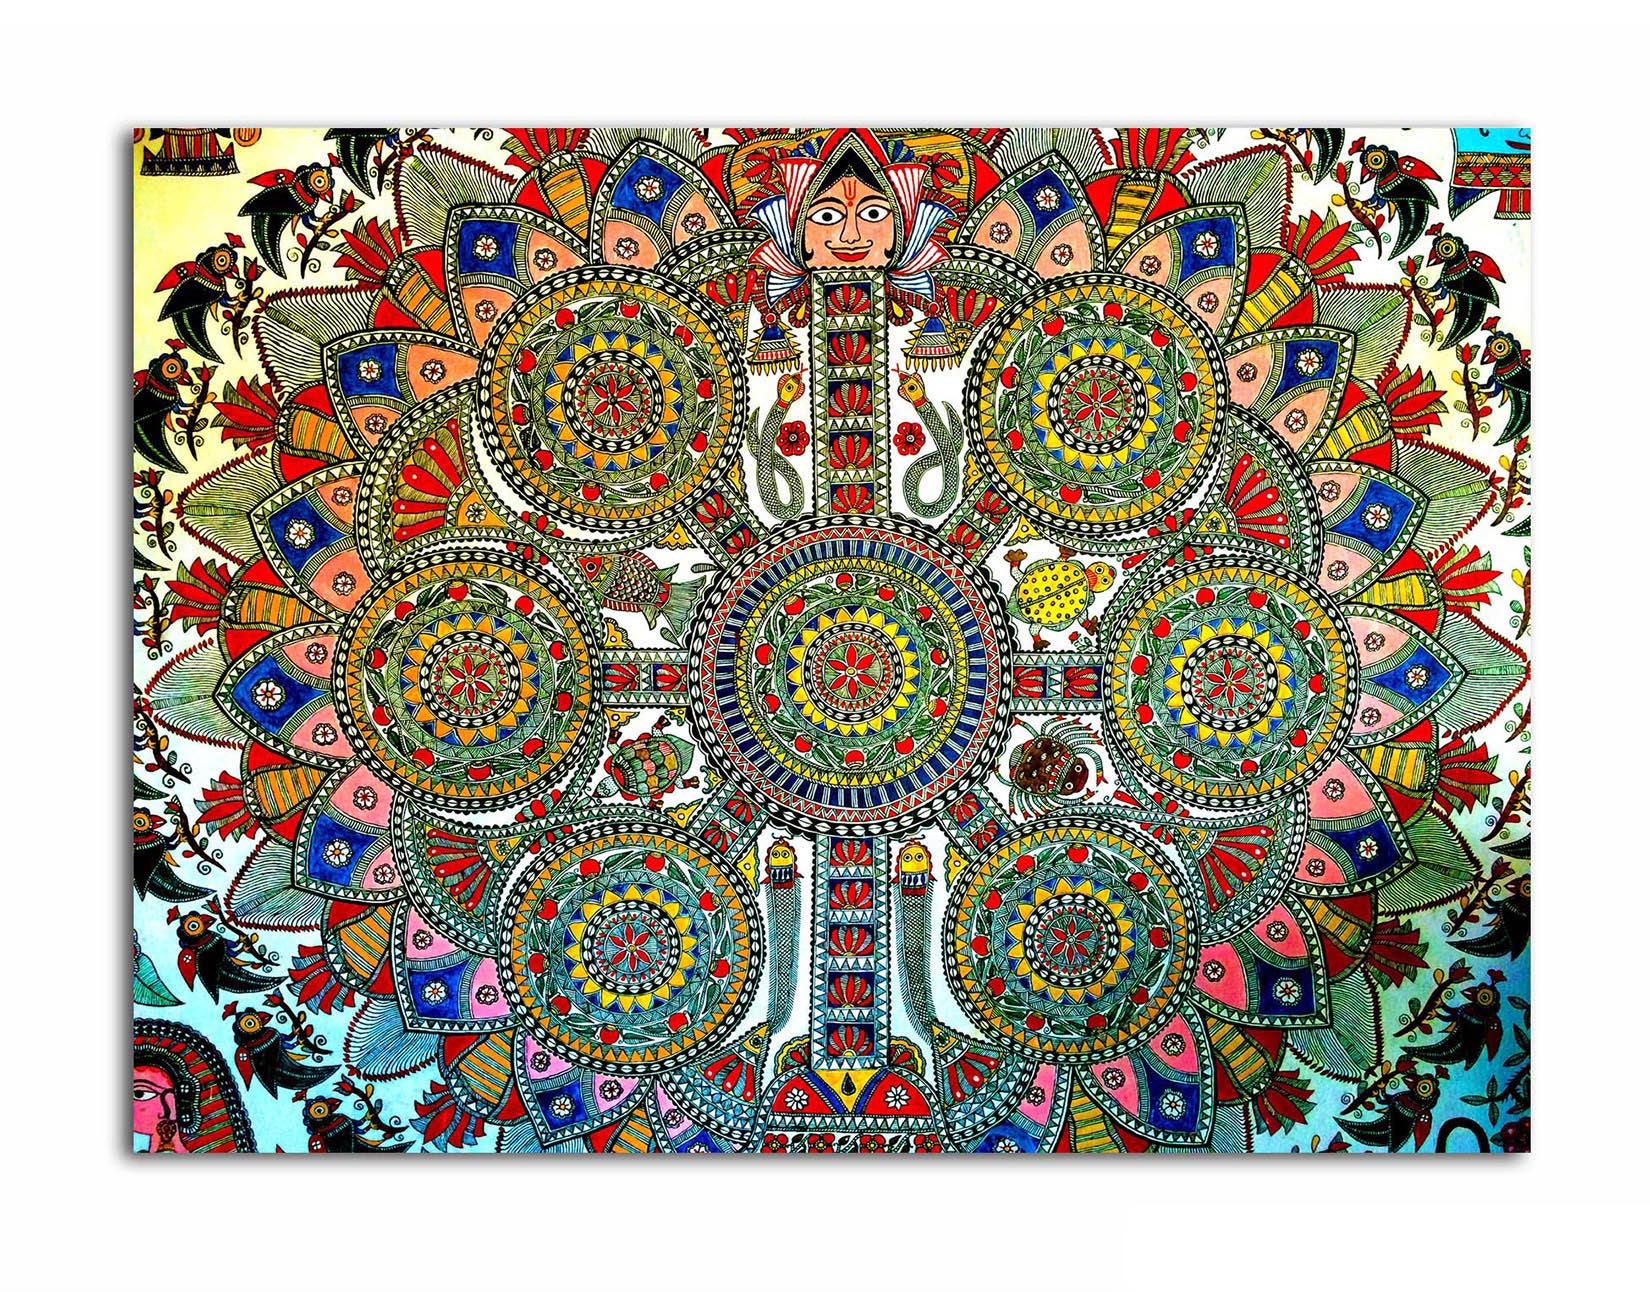 The Chakra of Life - Unframed Canvas Painting